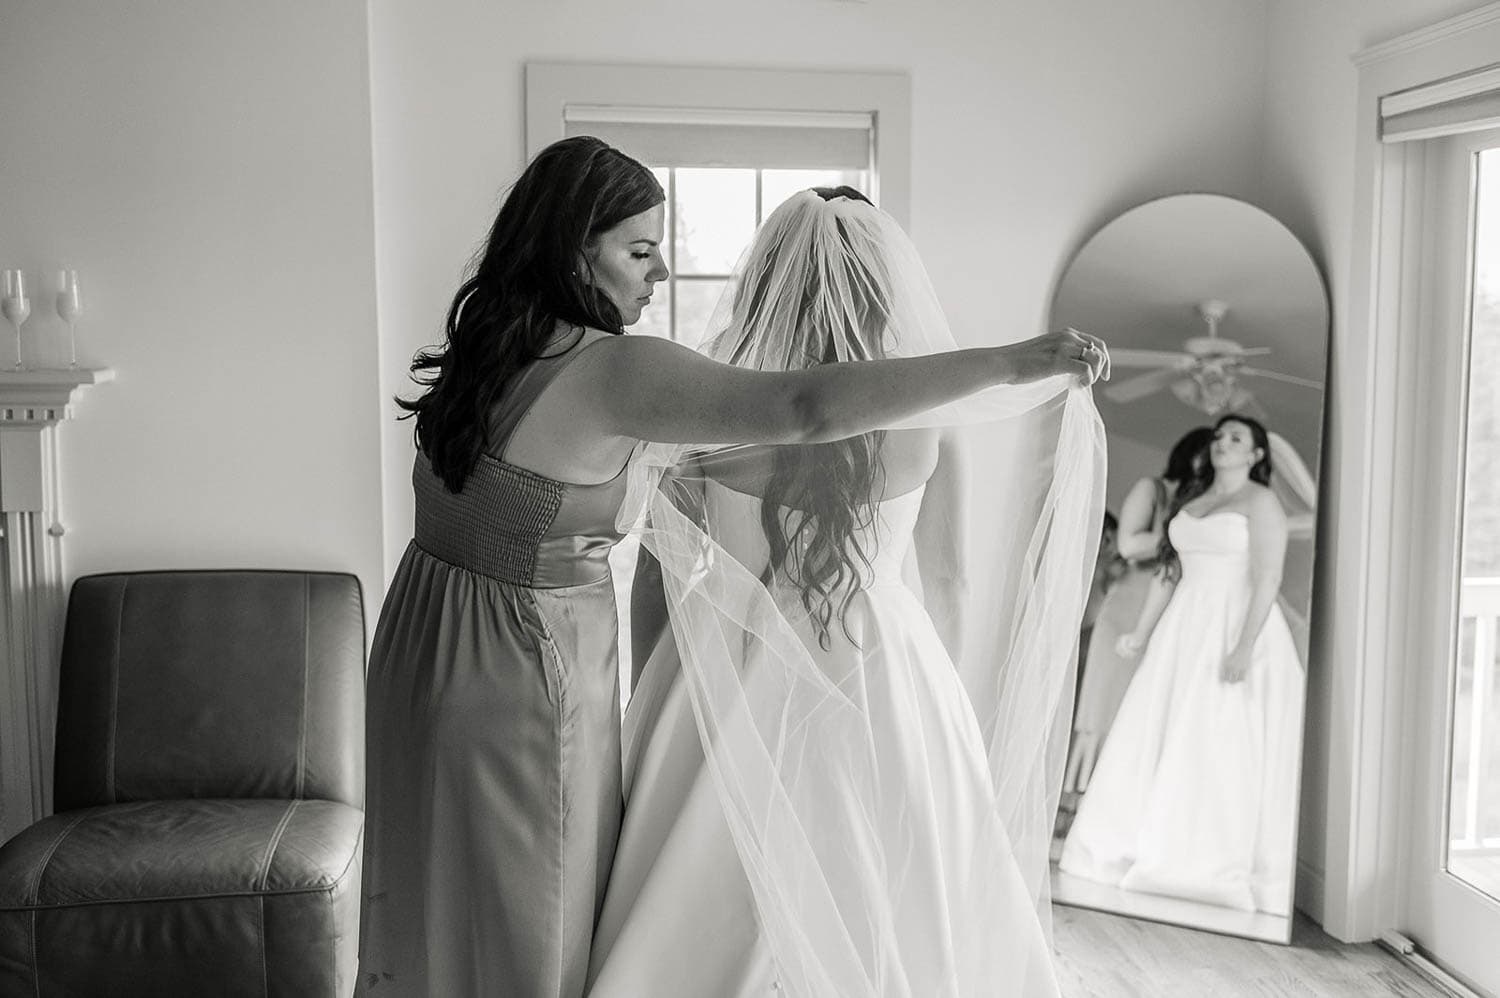 A woman adjusts the veil of a bride in front of a mirror in a softly lit room.